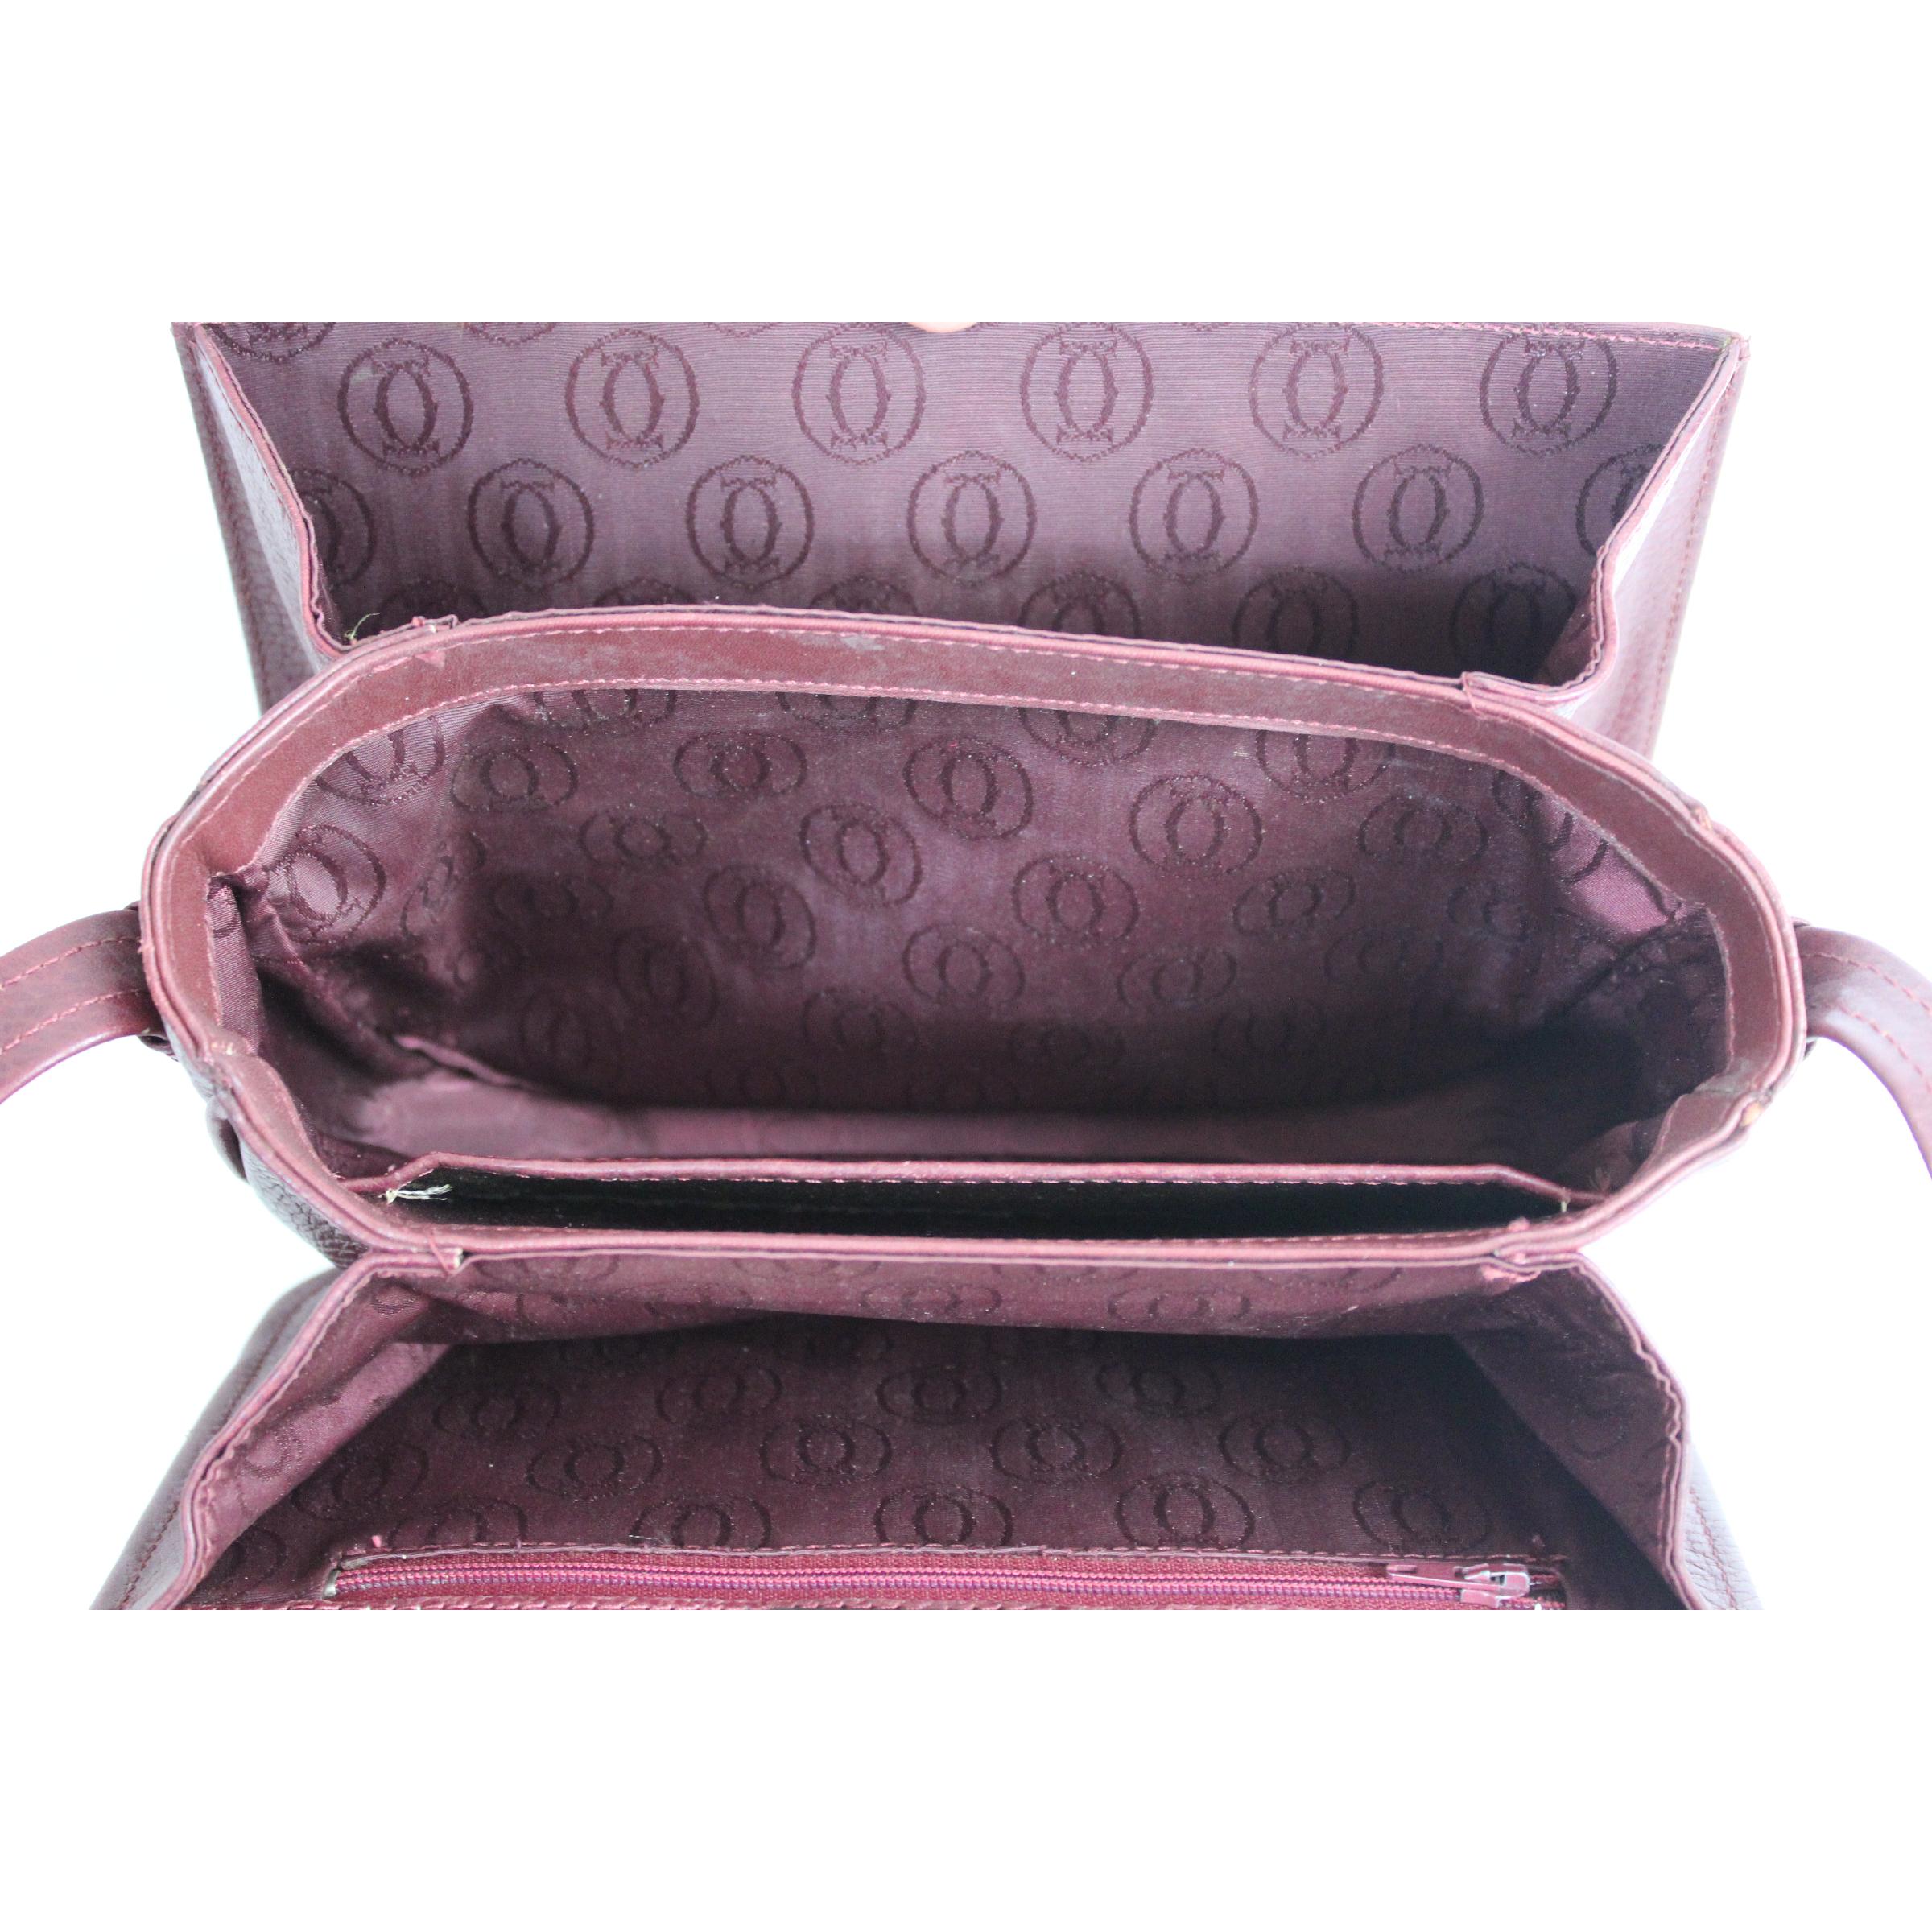 Must de Cartier vintage shoulder bag, burgundy color, 100% hammered leather. Adjustable shoulder strap, 3 compartments inside with dividers. 80s. Made in Italy. Very good vintage condition, some signs of use on the edges, excellent interior.